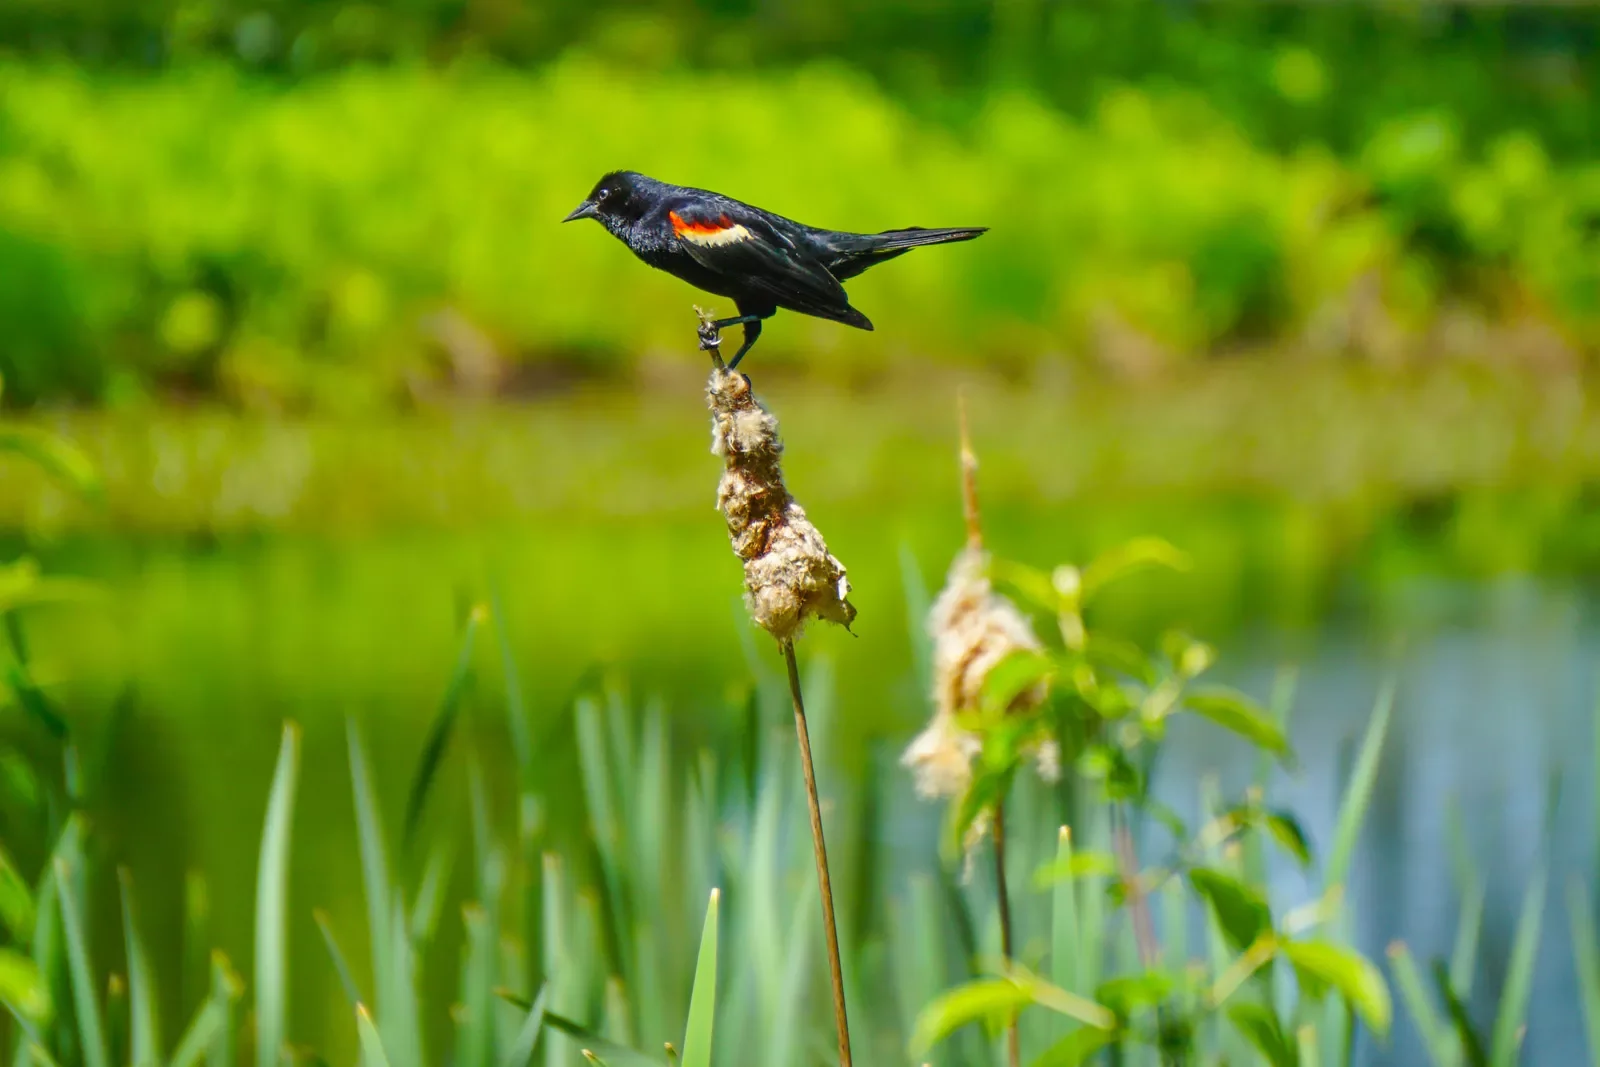 Close up of male red-winged black bird, stream in background.